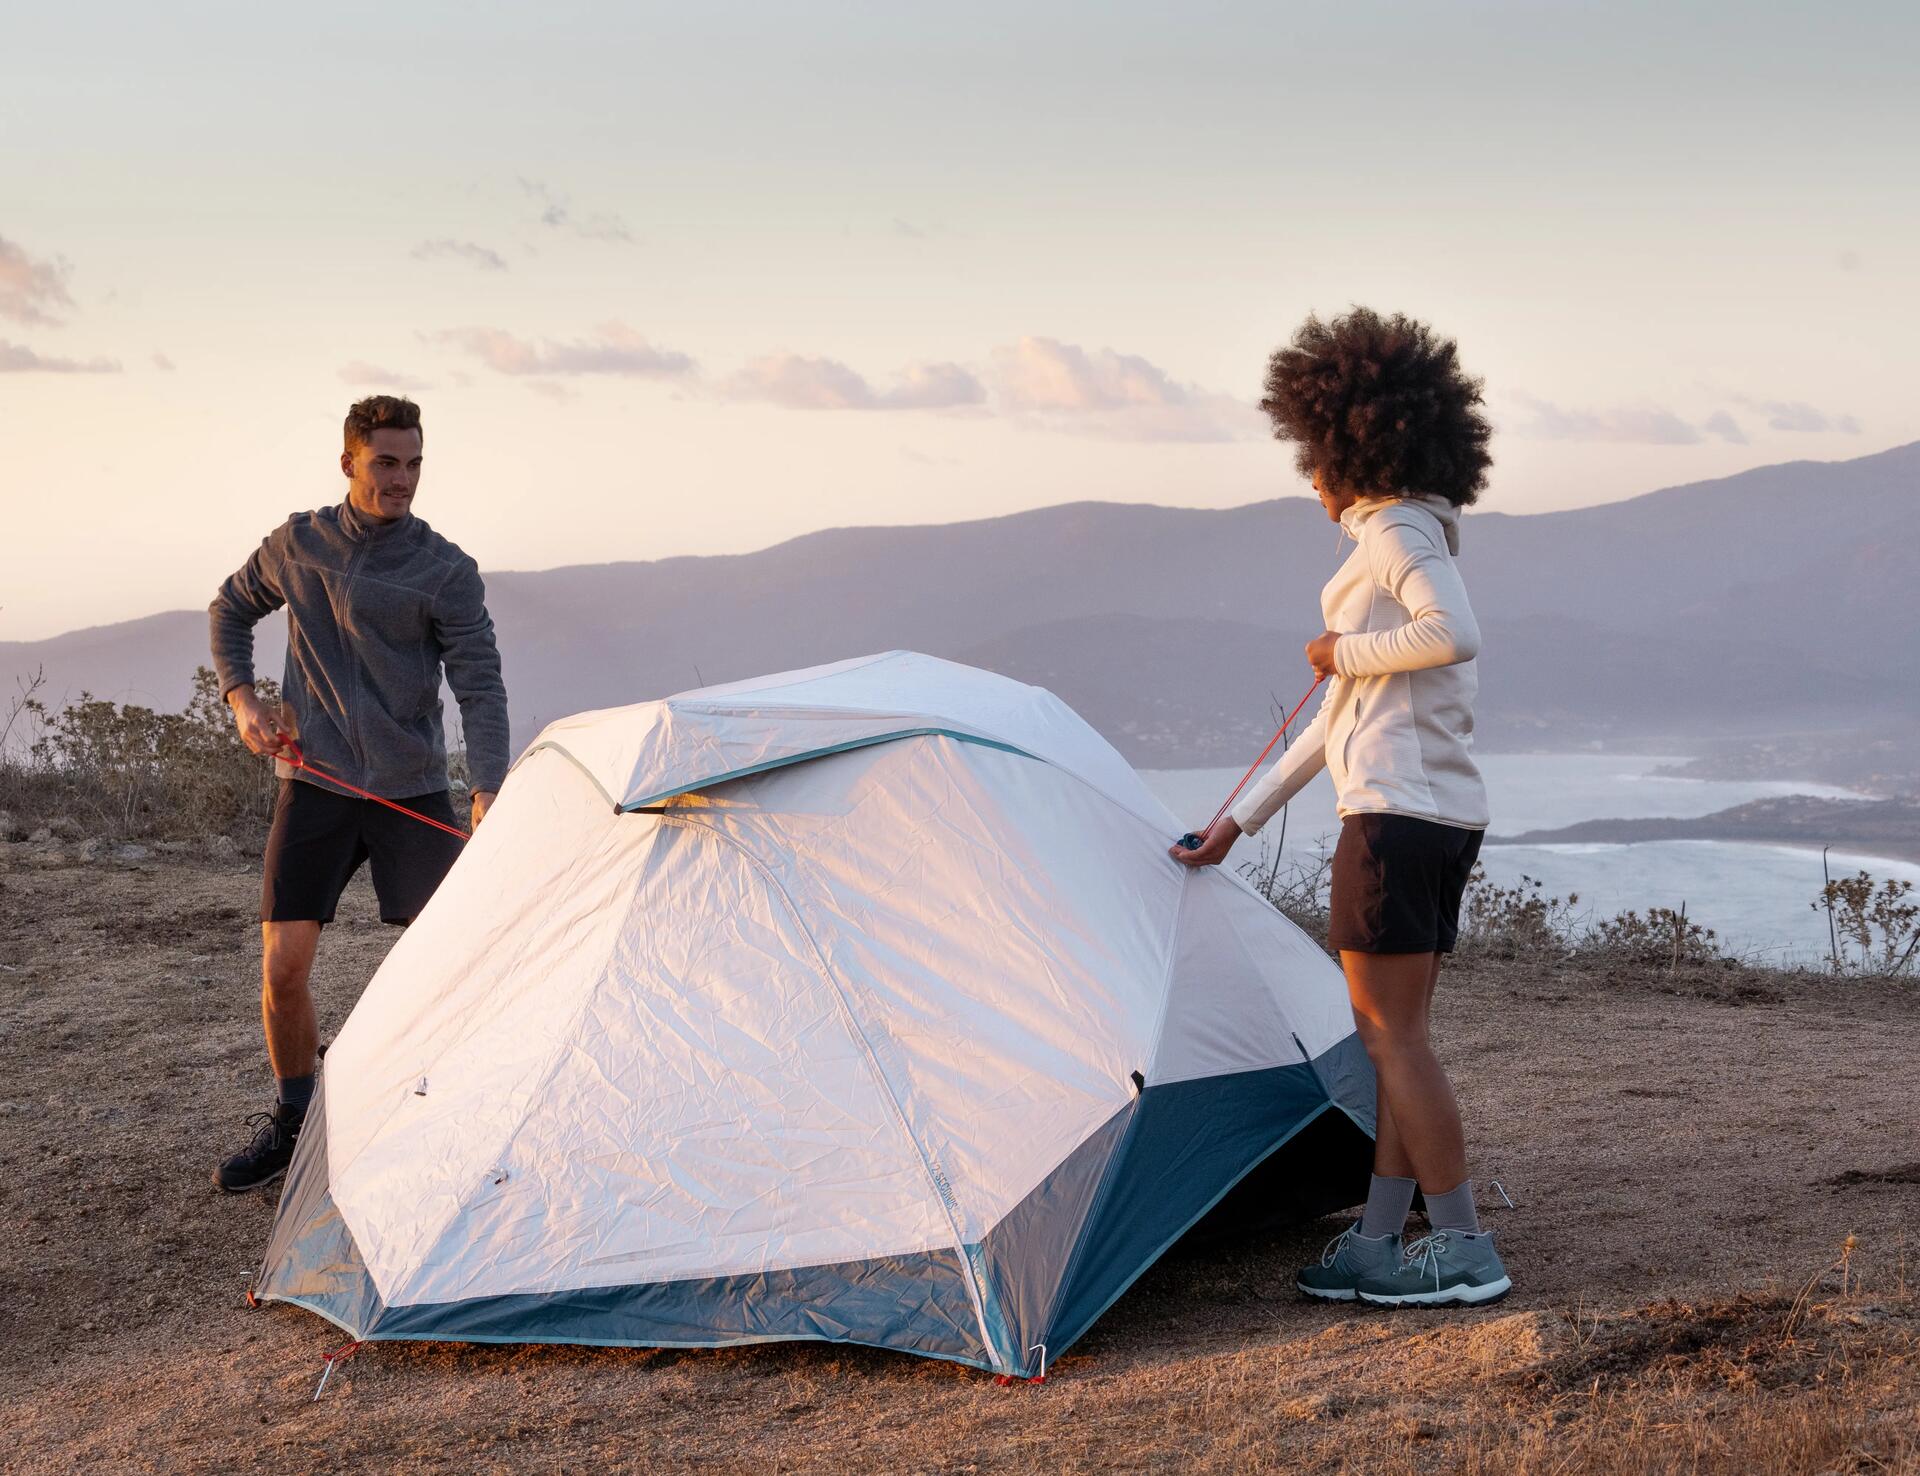 How to Choose Your Camping Tent?